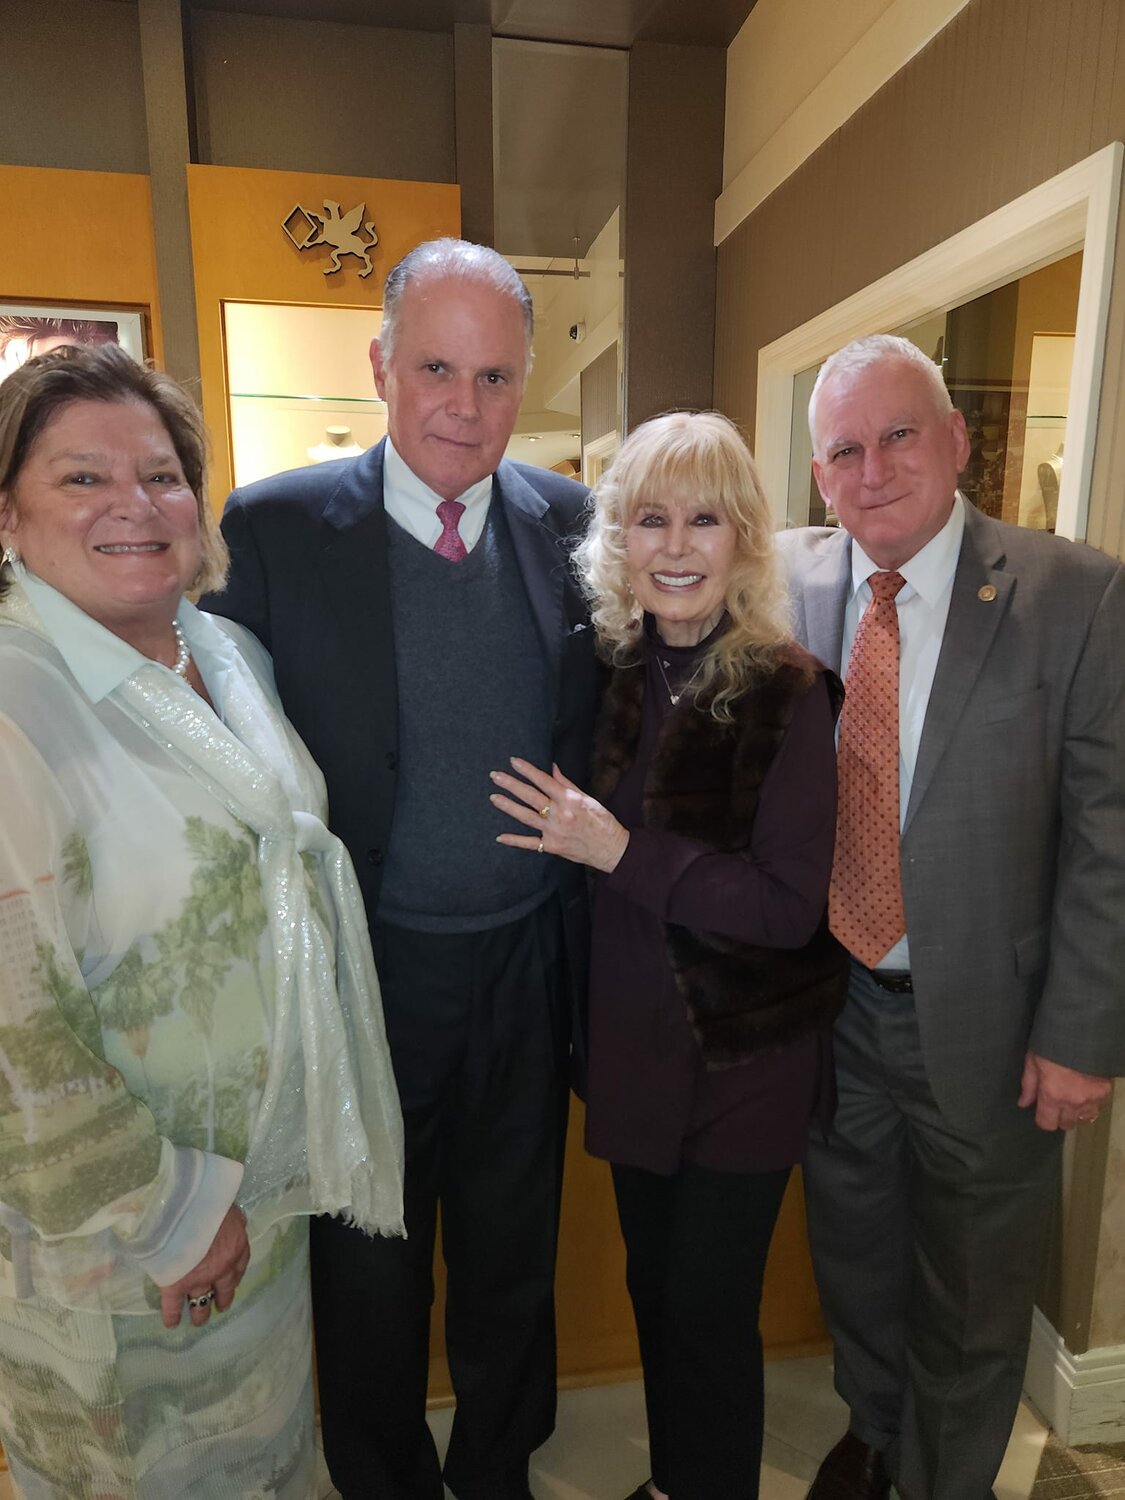 Christy Bromberg, Clayton Bromberg, Loretta Swit and John Rutkowski during the cocktail party to open the trunk show Nov. 2.